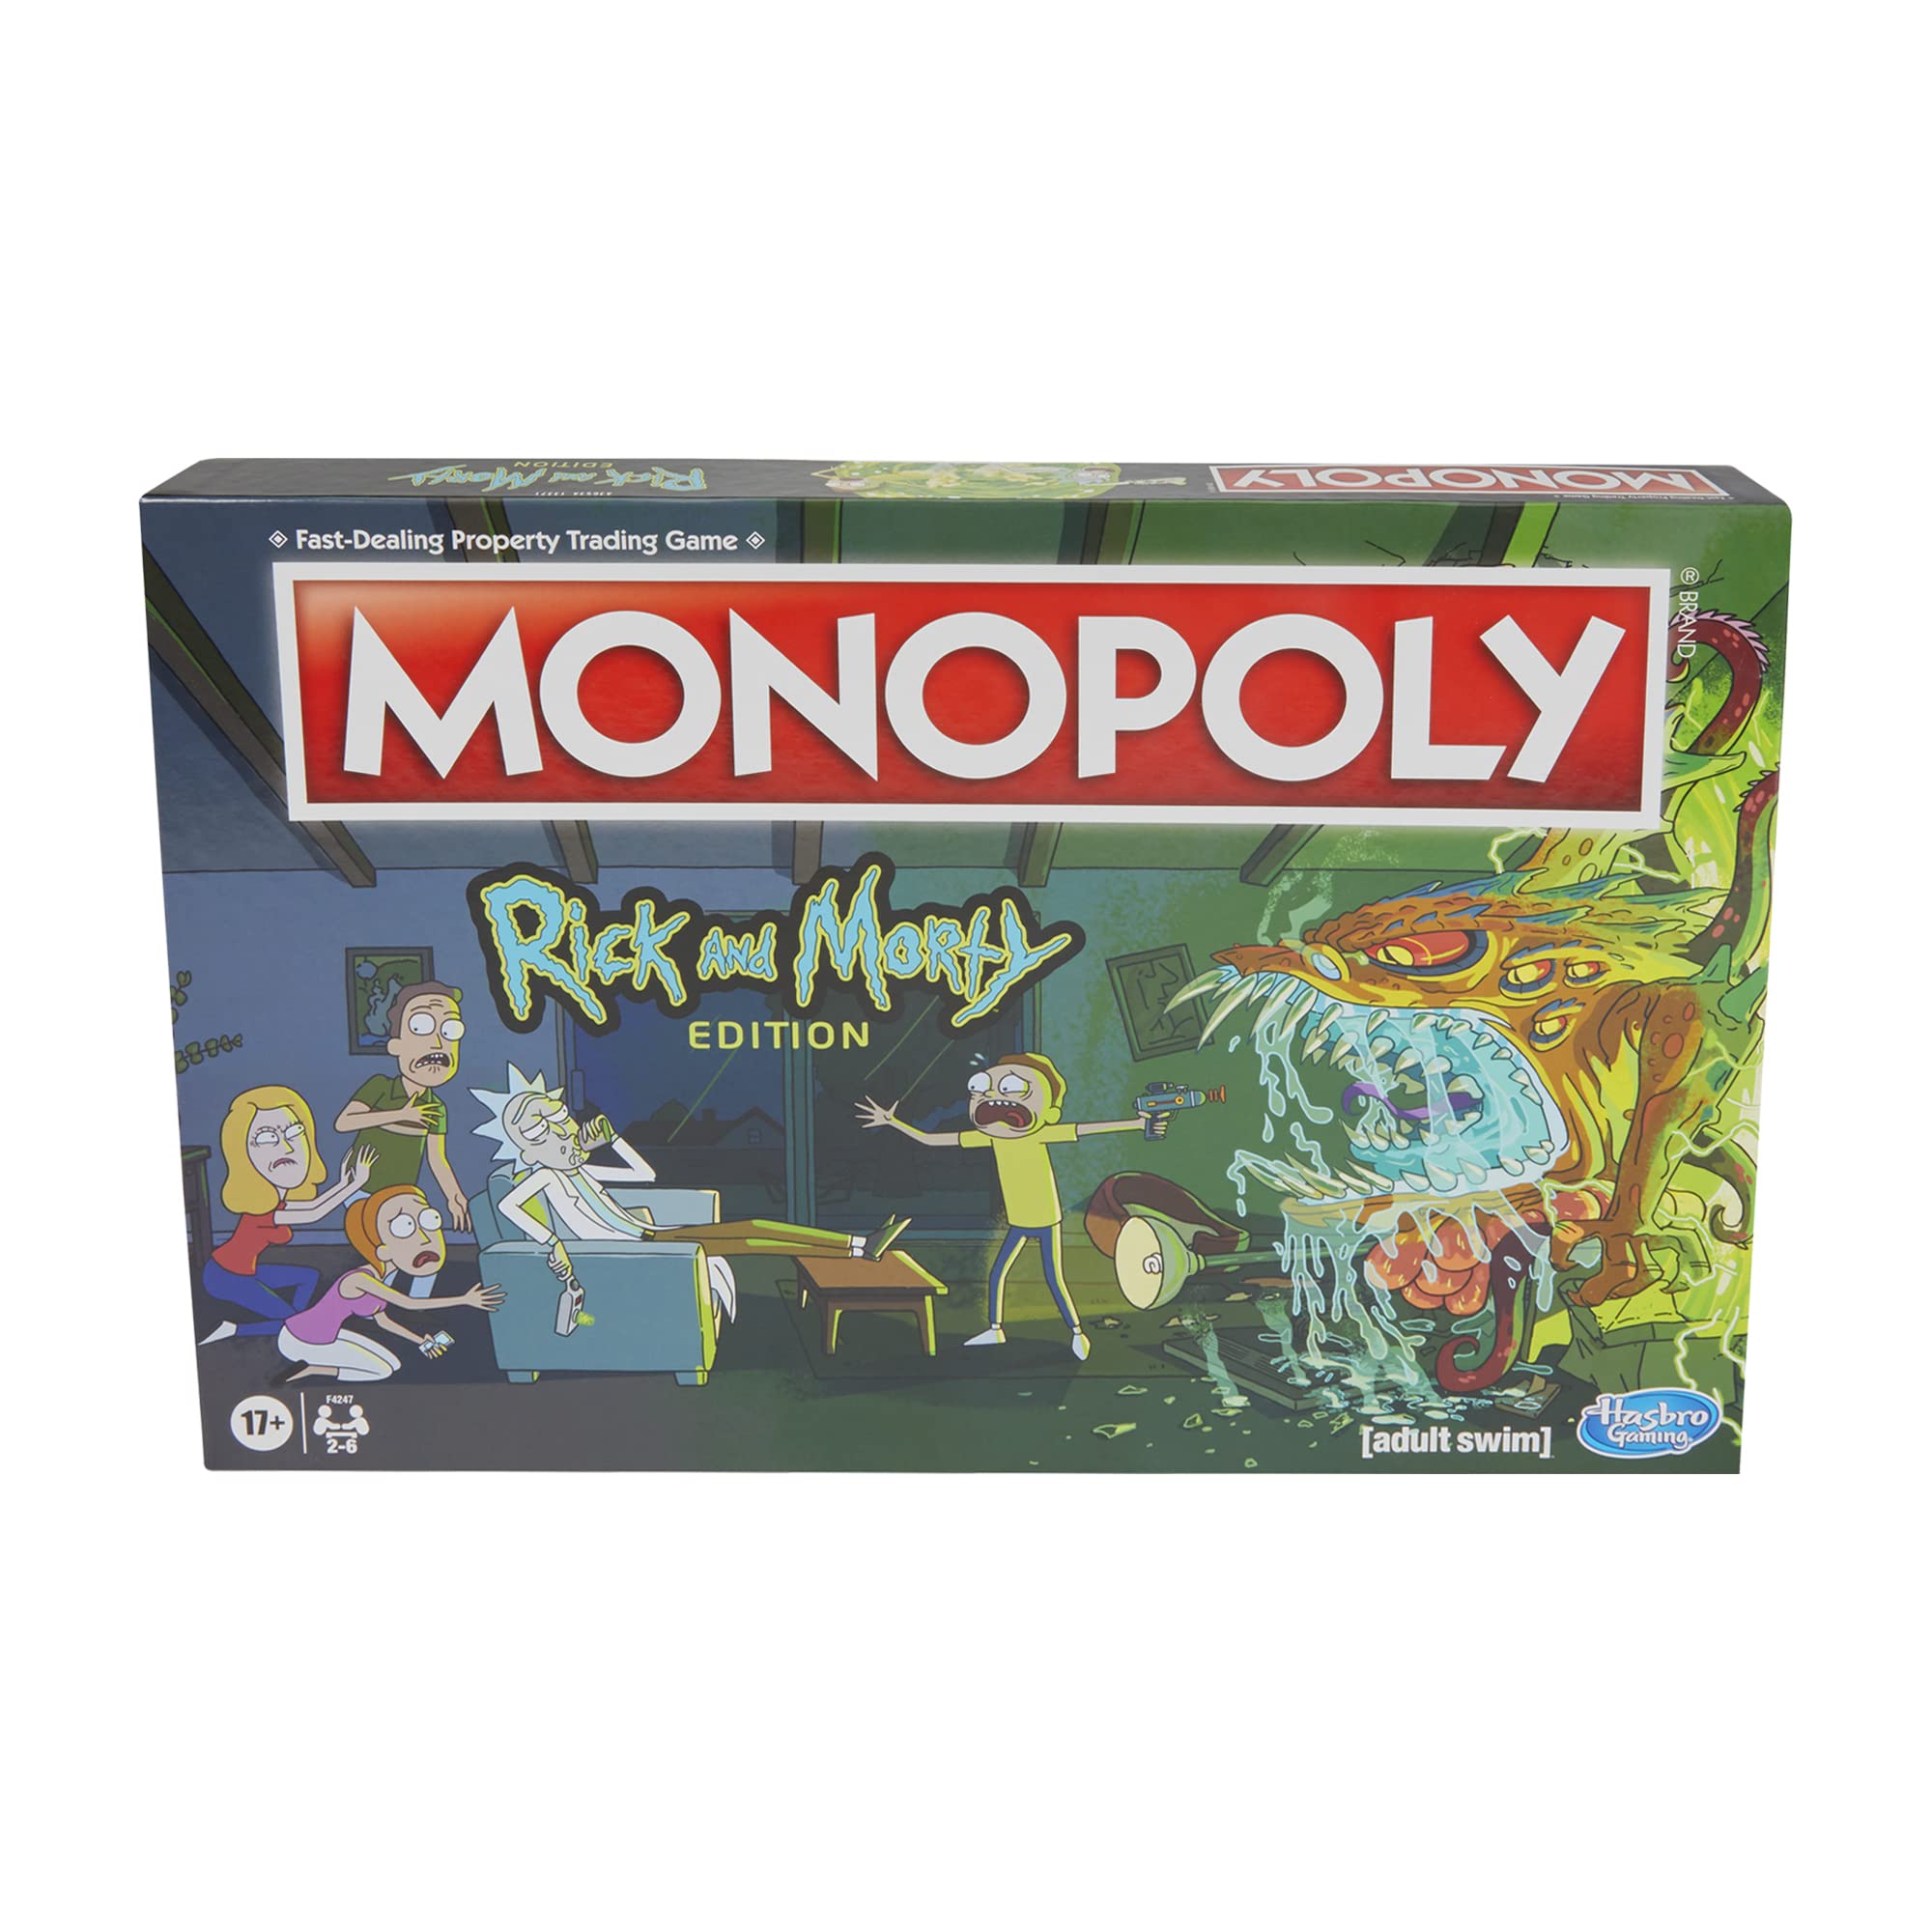 Hasbro Monopoly: Rick and Morty Edition Board game, cartoon Network game for Families and Teens 17+, Includes collectible Monopoly Toke